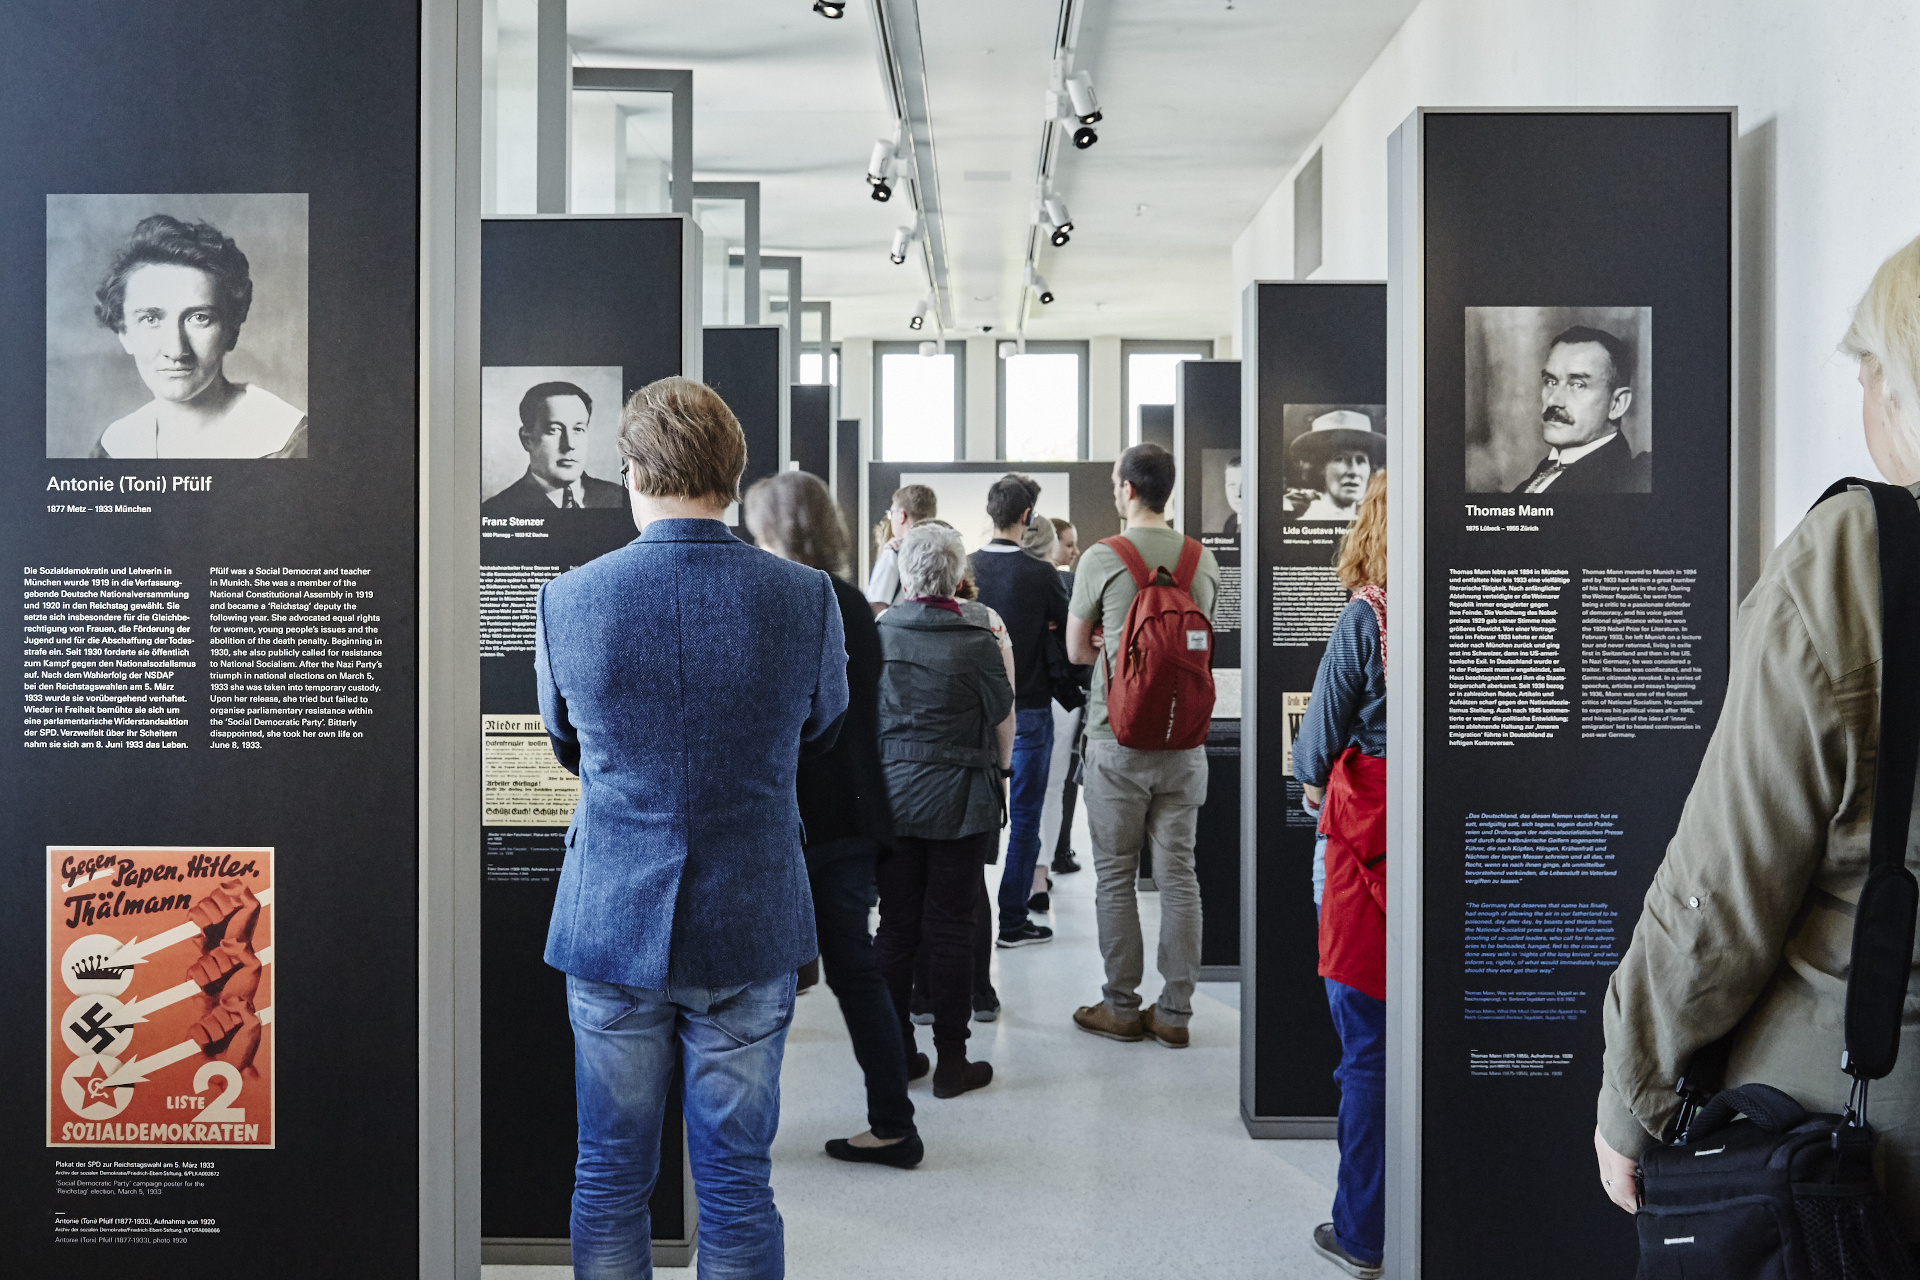 Several people looking at exhibition panels arranged on the left and right.